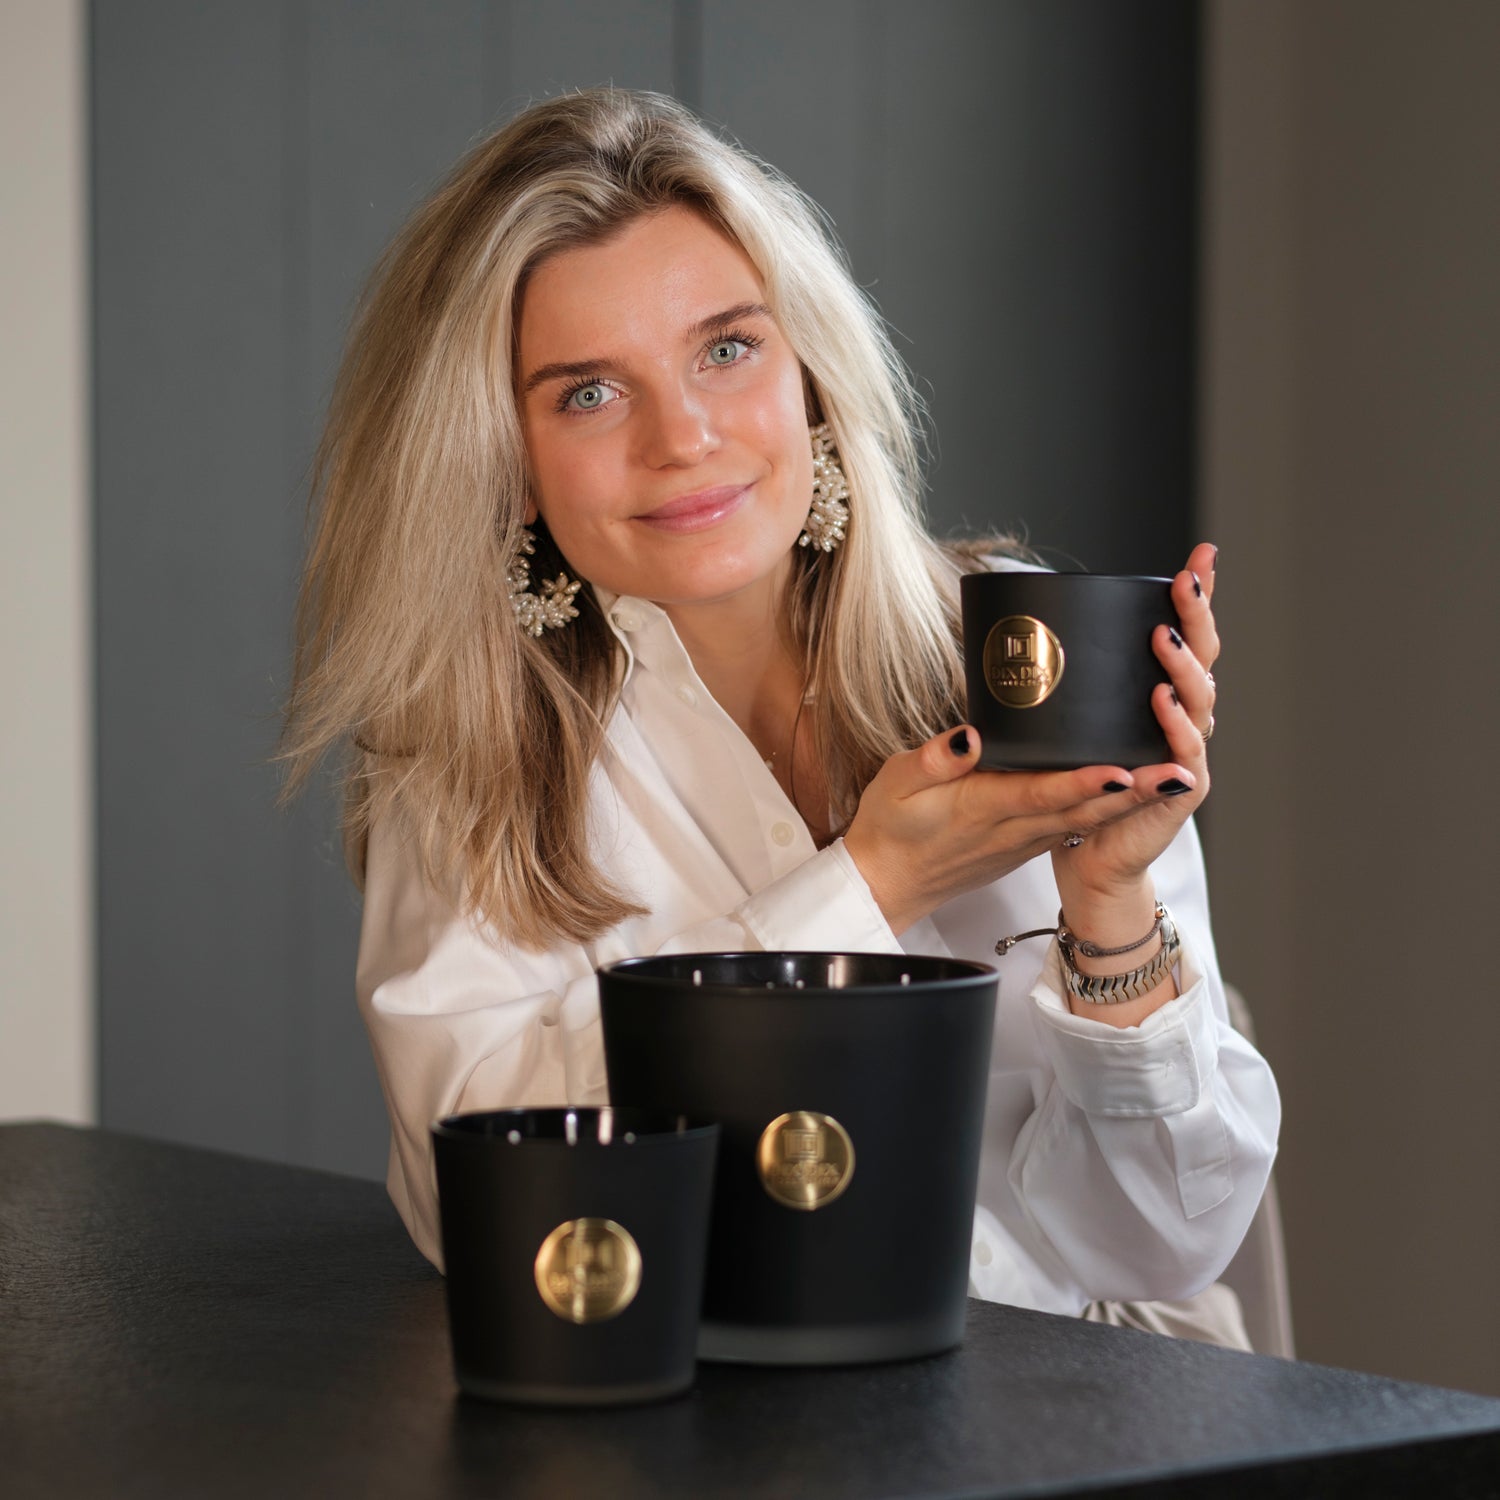 owner and founder of DIX DIX collection Ellemijn Ensink